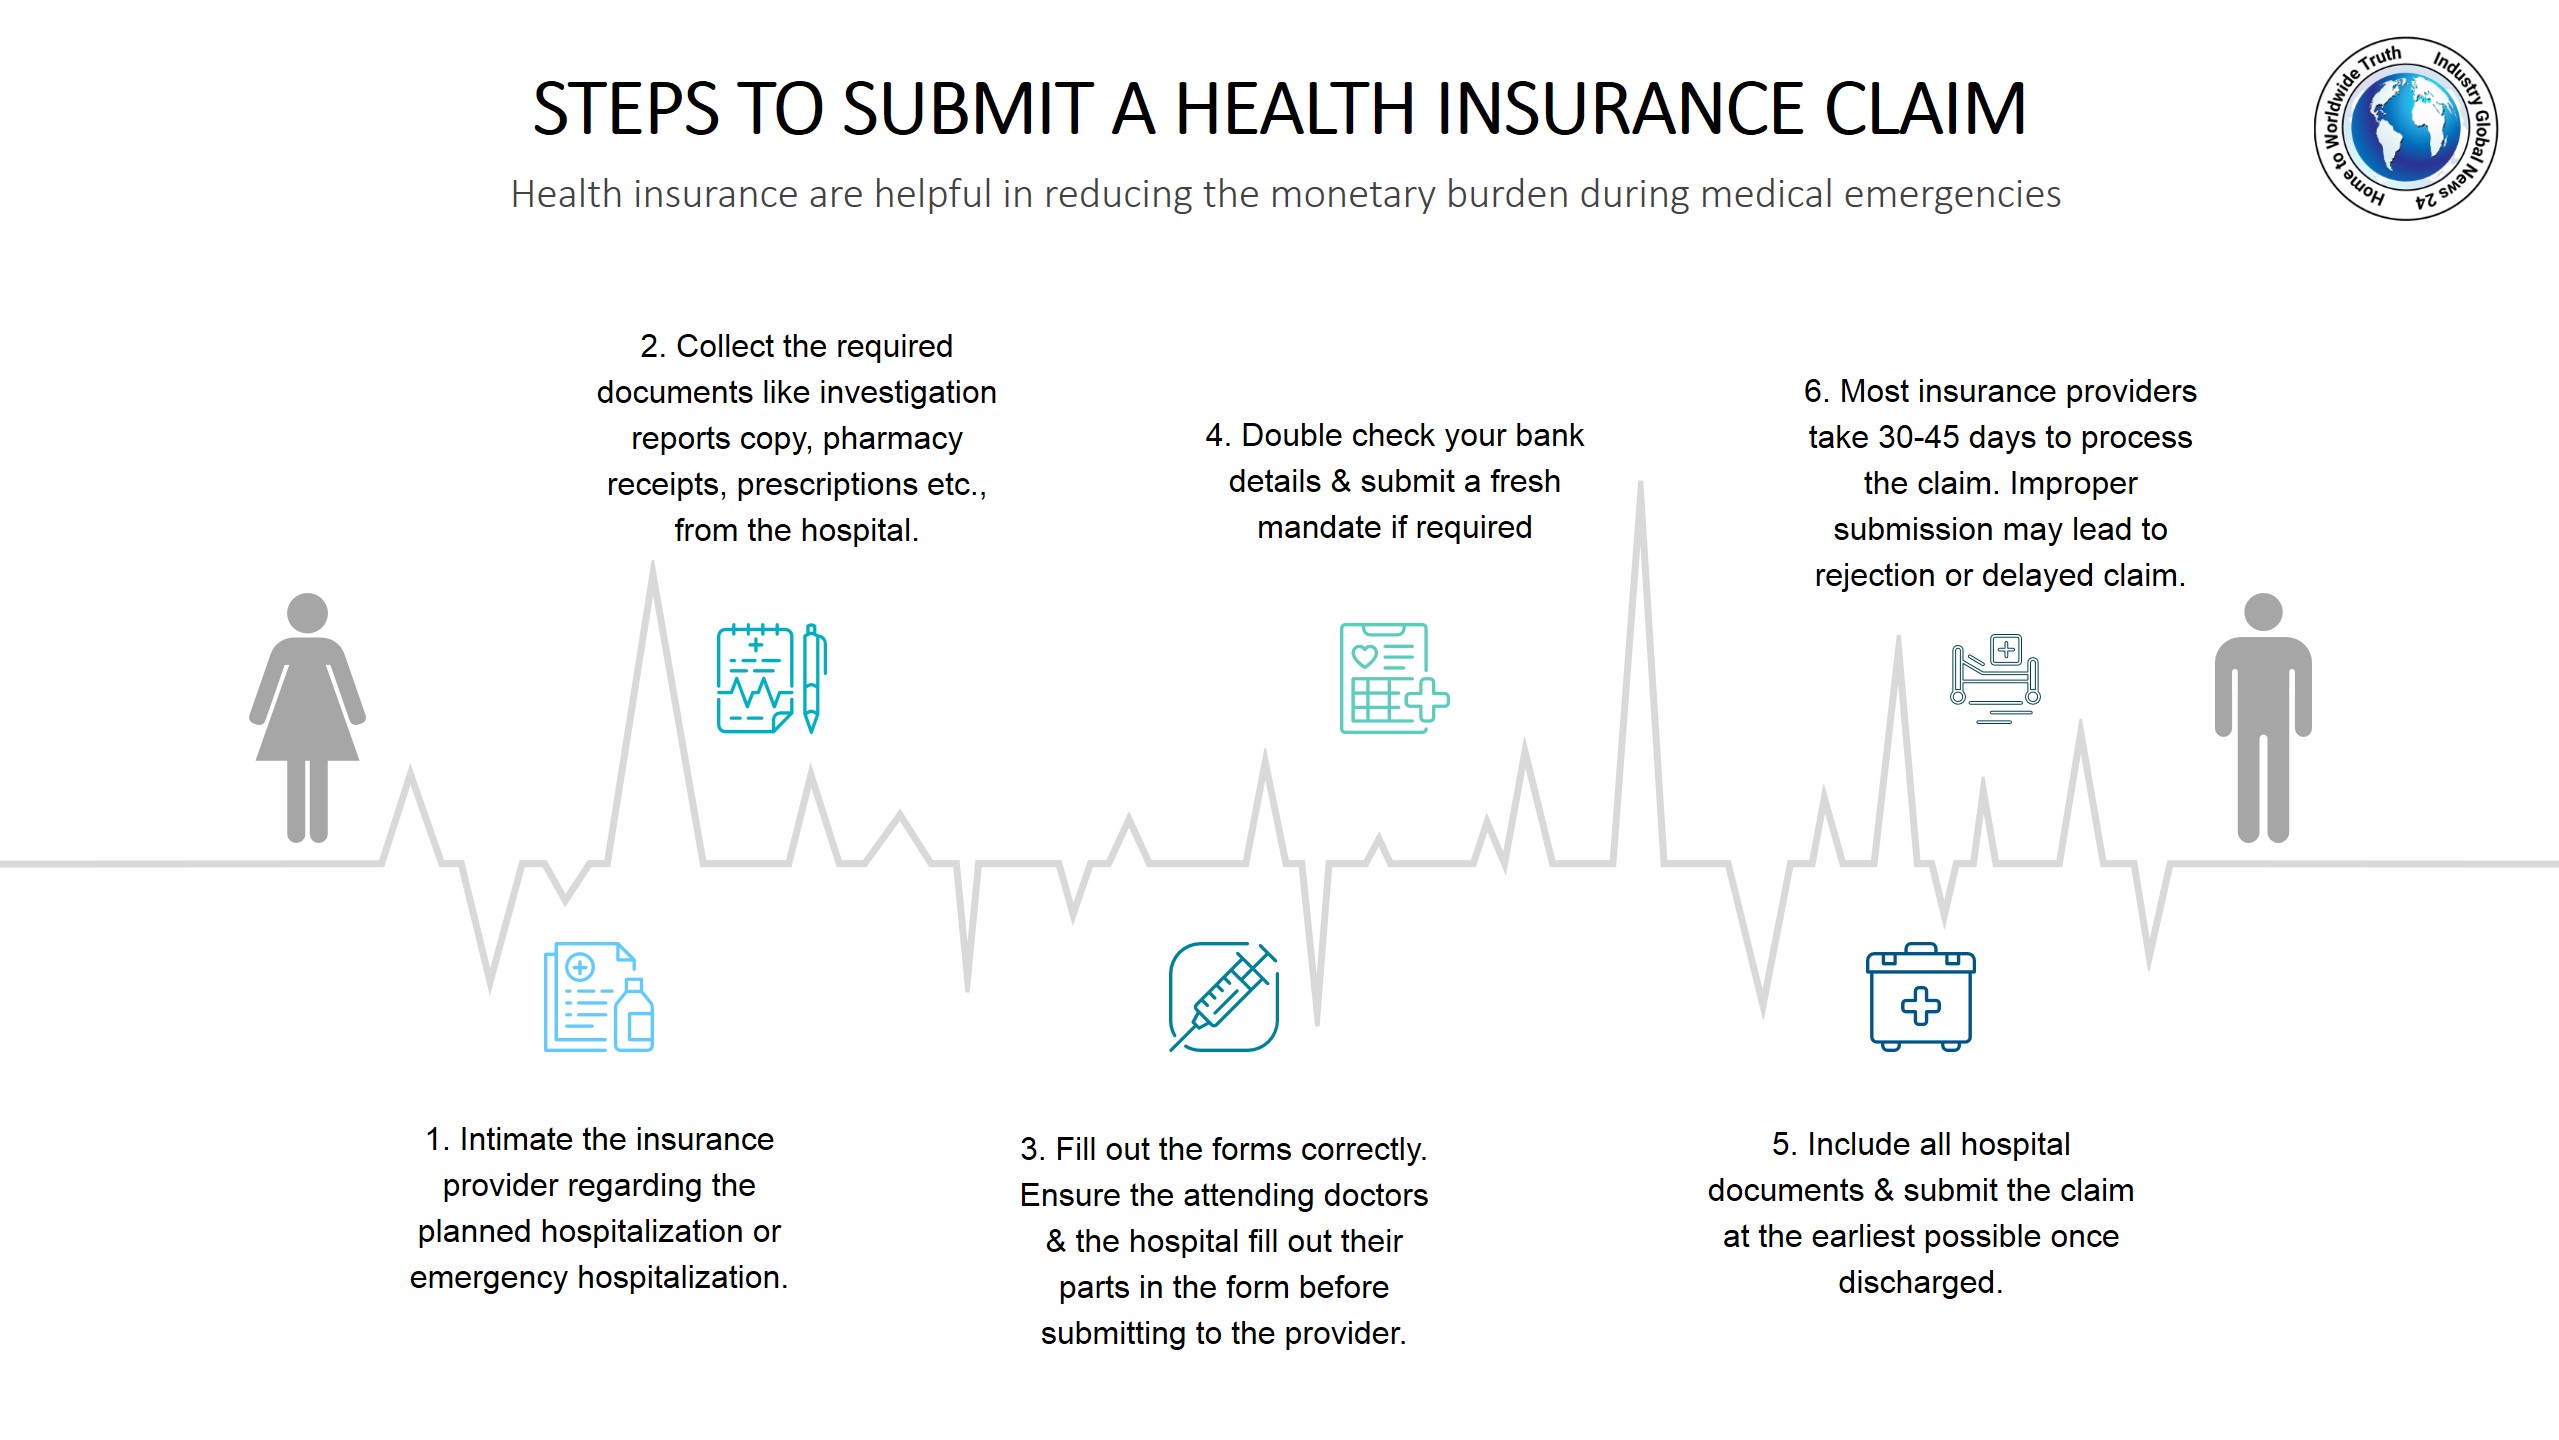 Steps to submit a health insurance claim